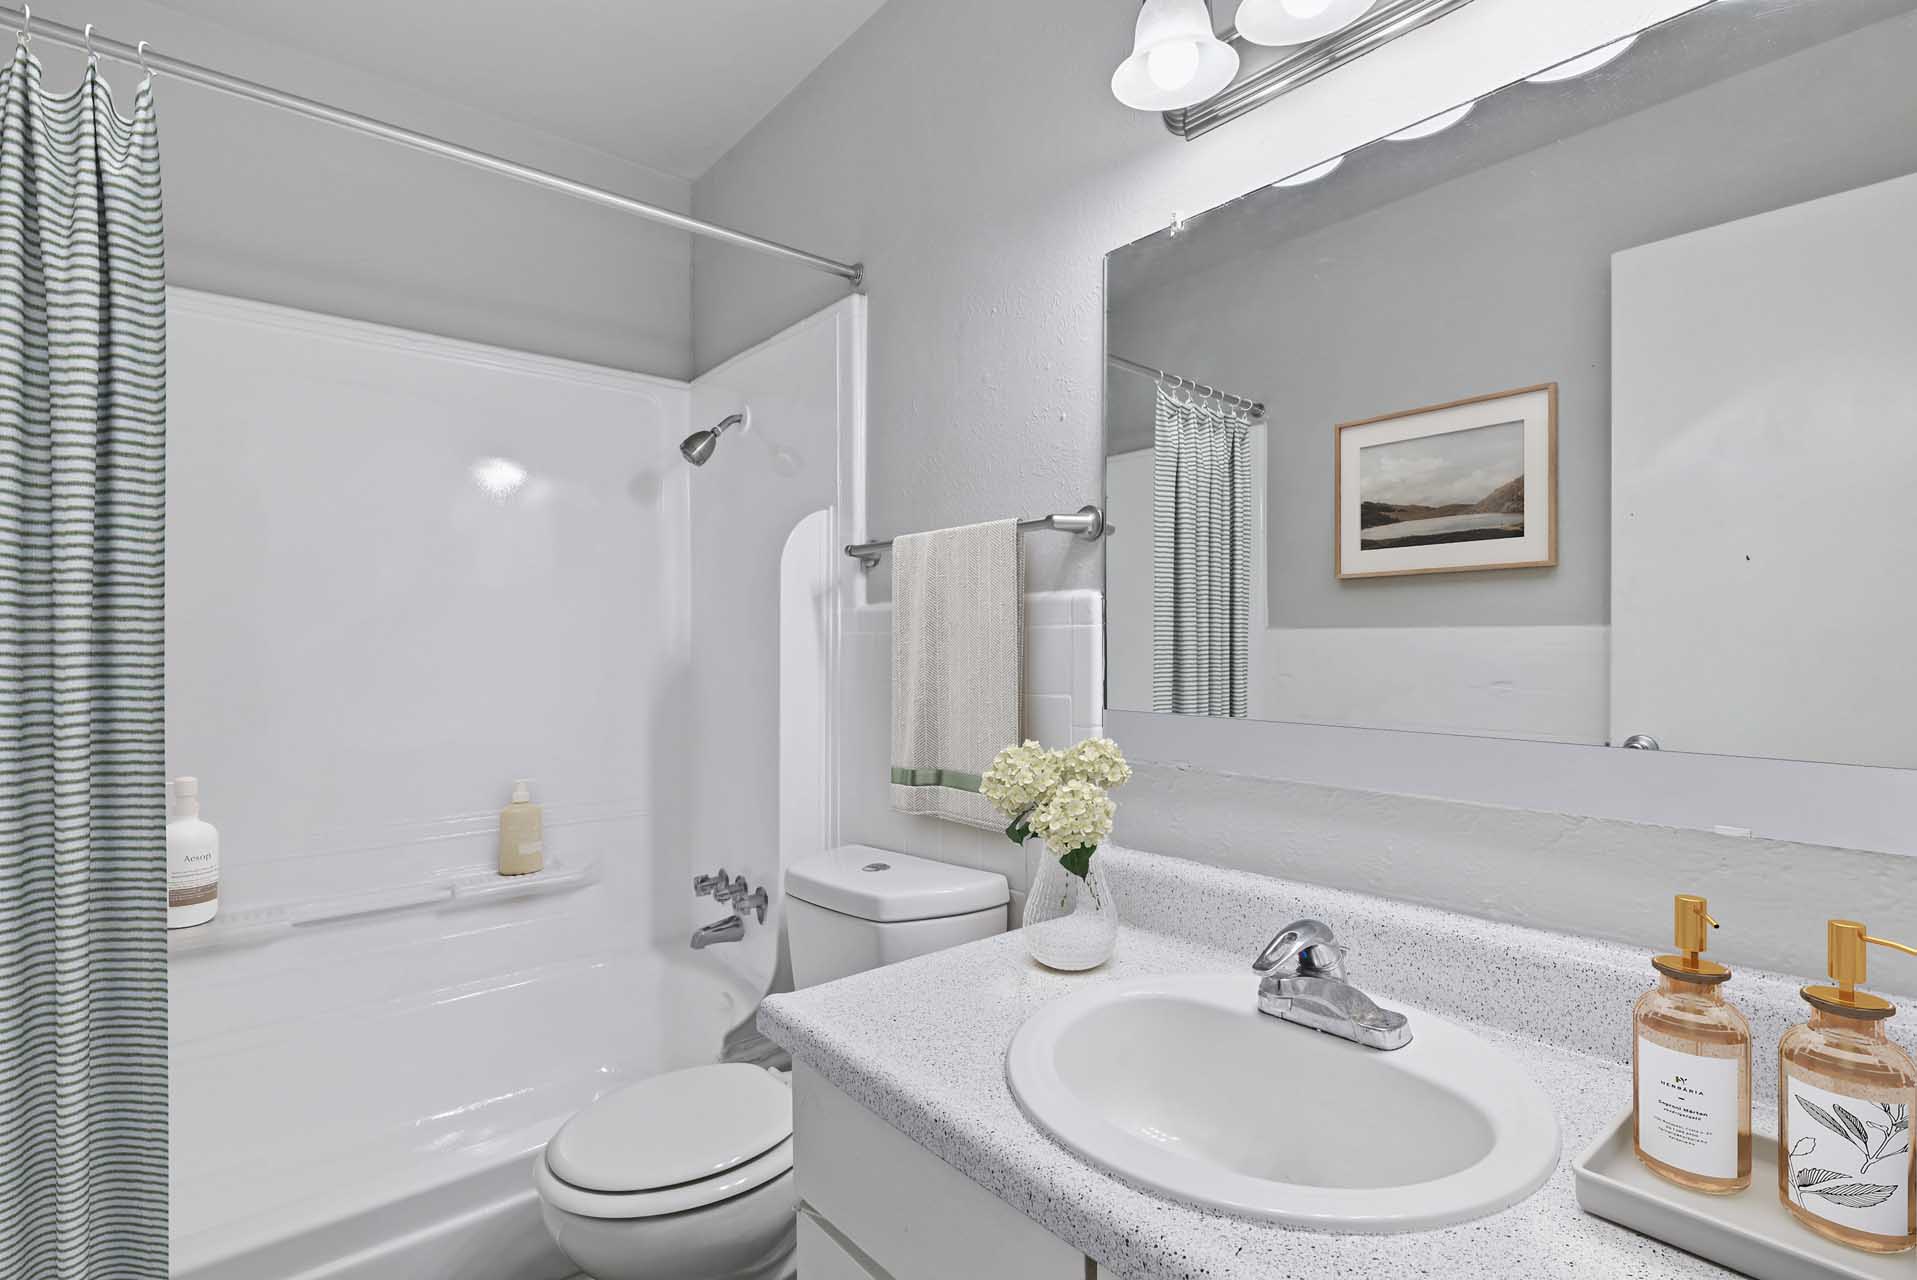 Renovated bathroom with white cabinet and upgraded hardware